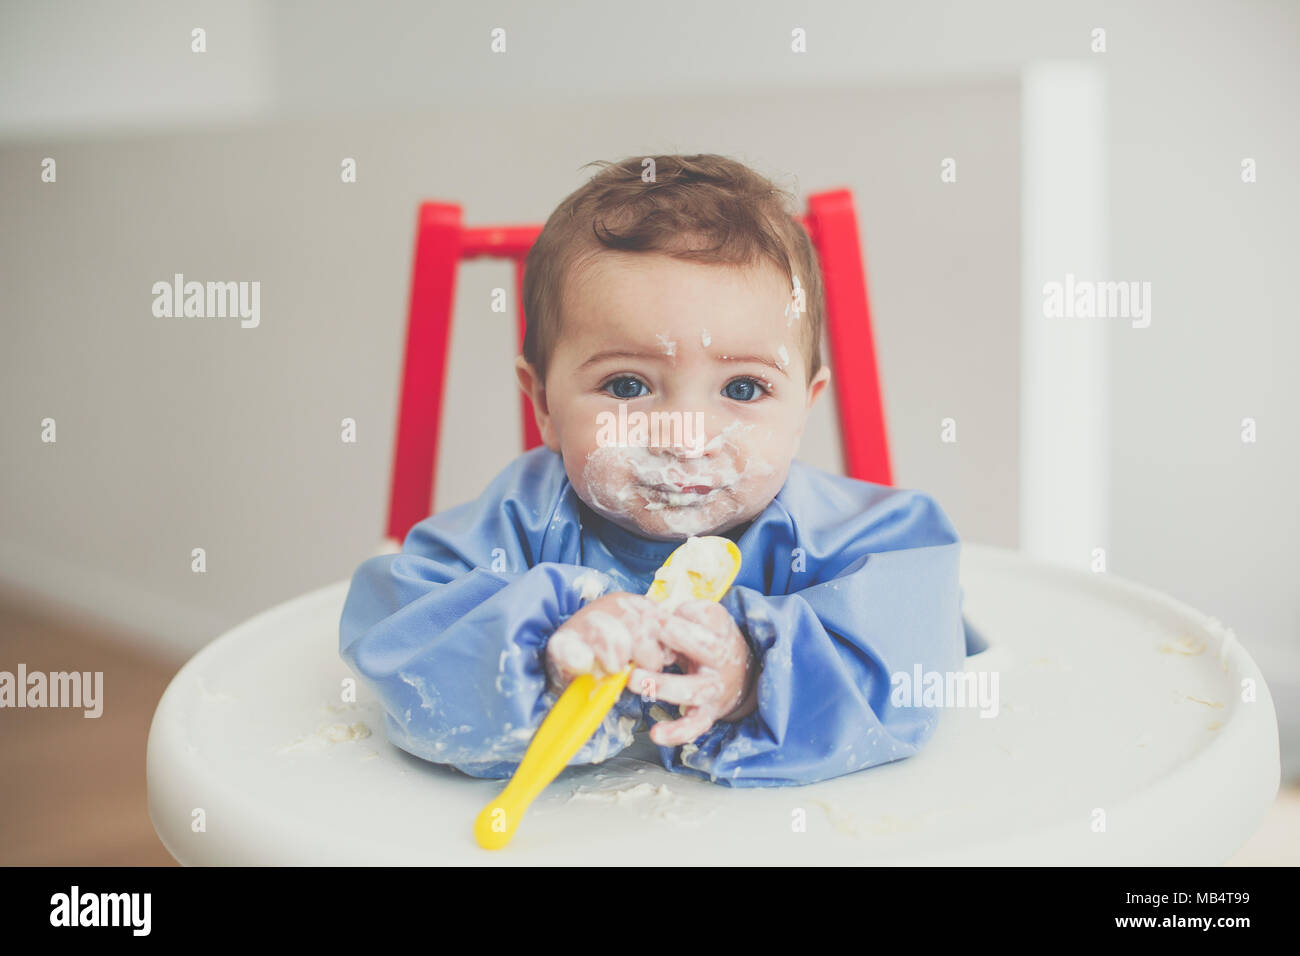 6 month old baby boy feeding himself yoghurt with a spoon Stock Photo